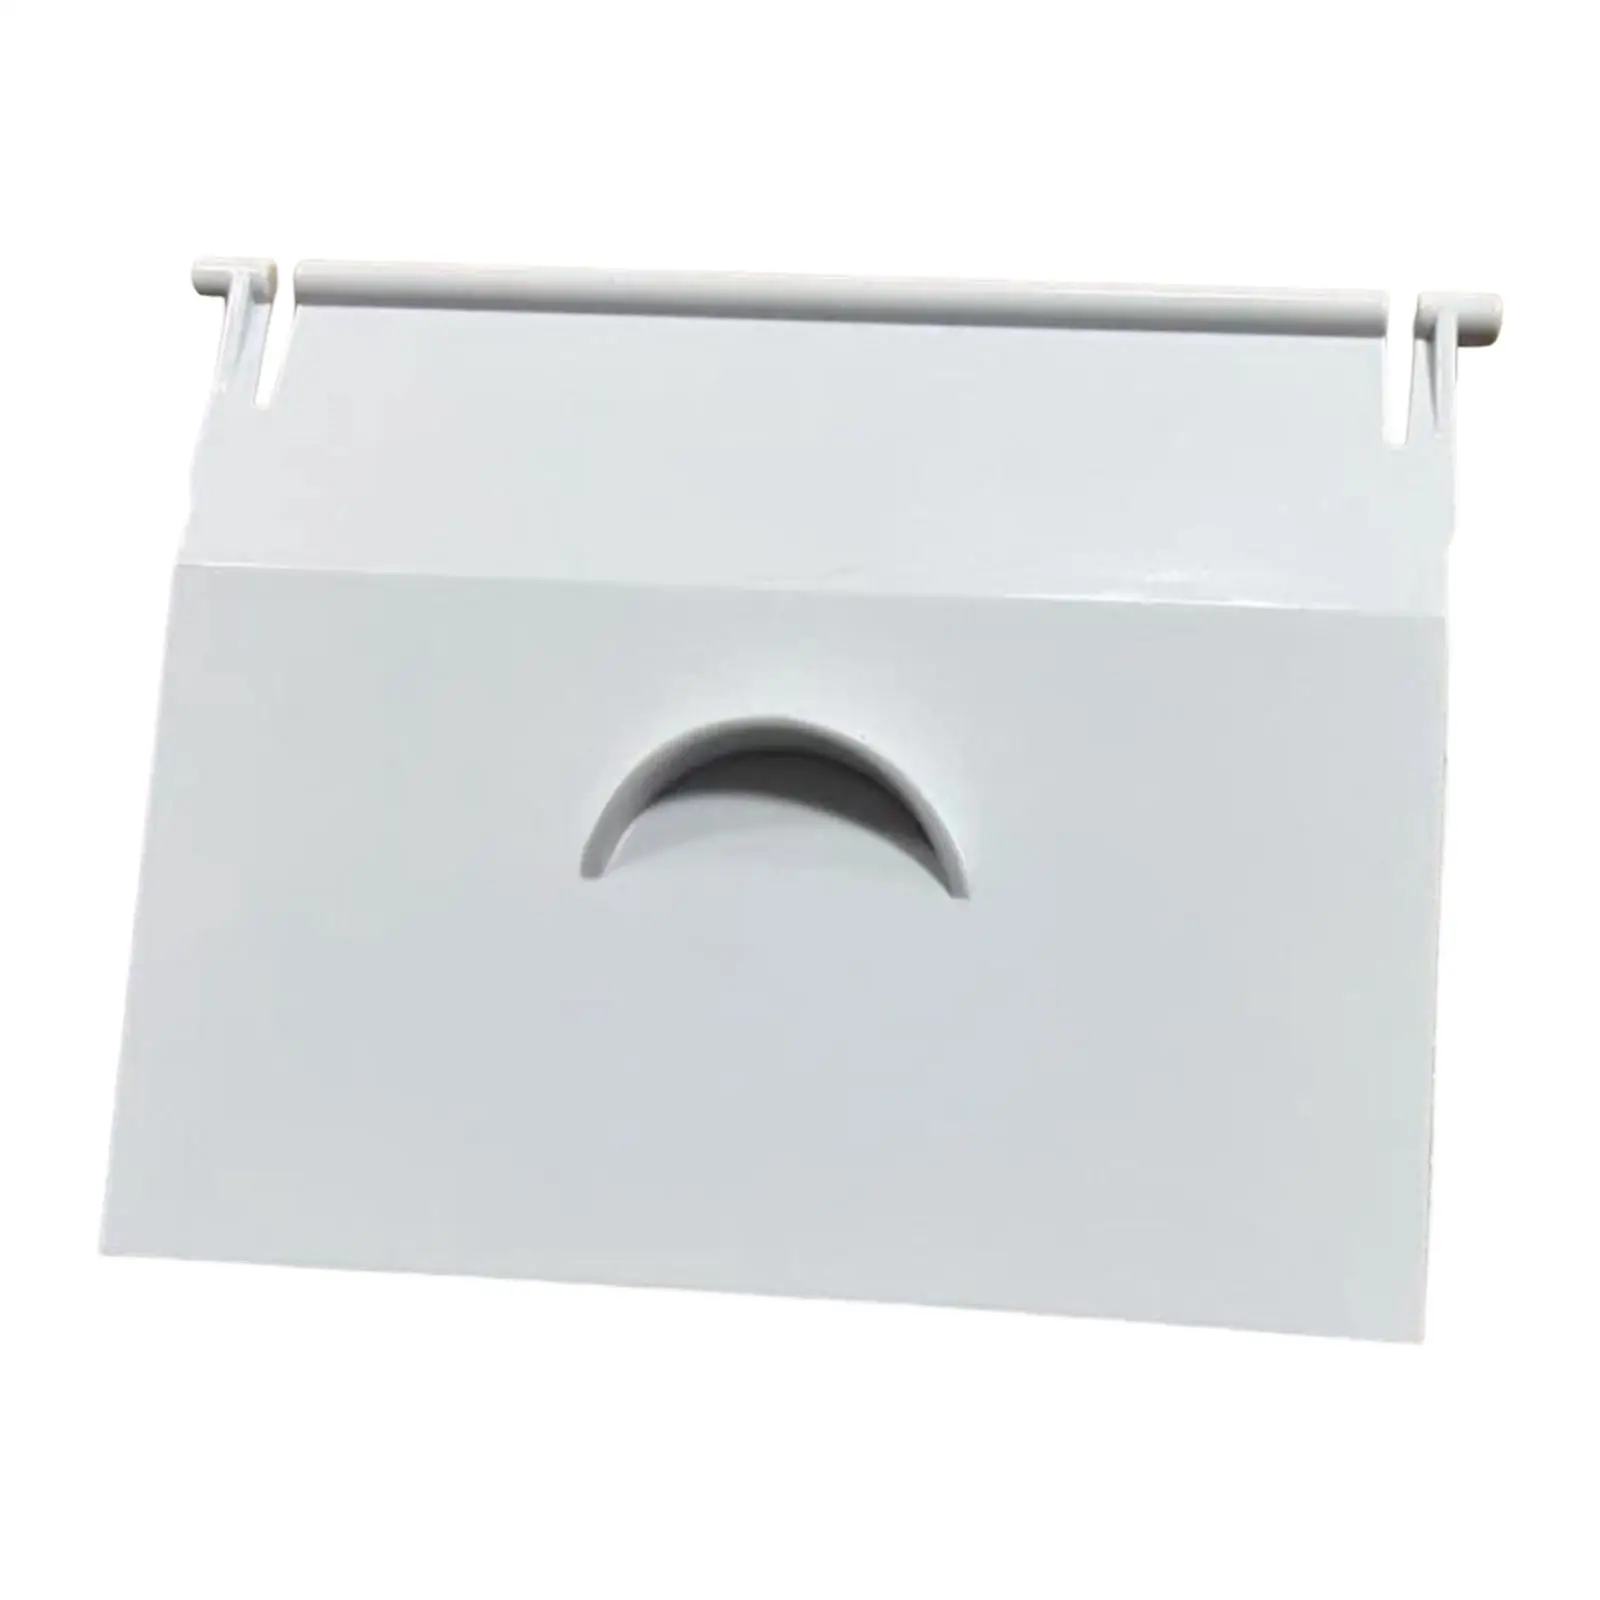 Gate Baffle with Sponge Rust Resistant Fittings Swimming Pool Skimmer Gate Weir Baffle White Weir Gate Assembly for Spx1091 Accs